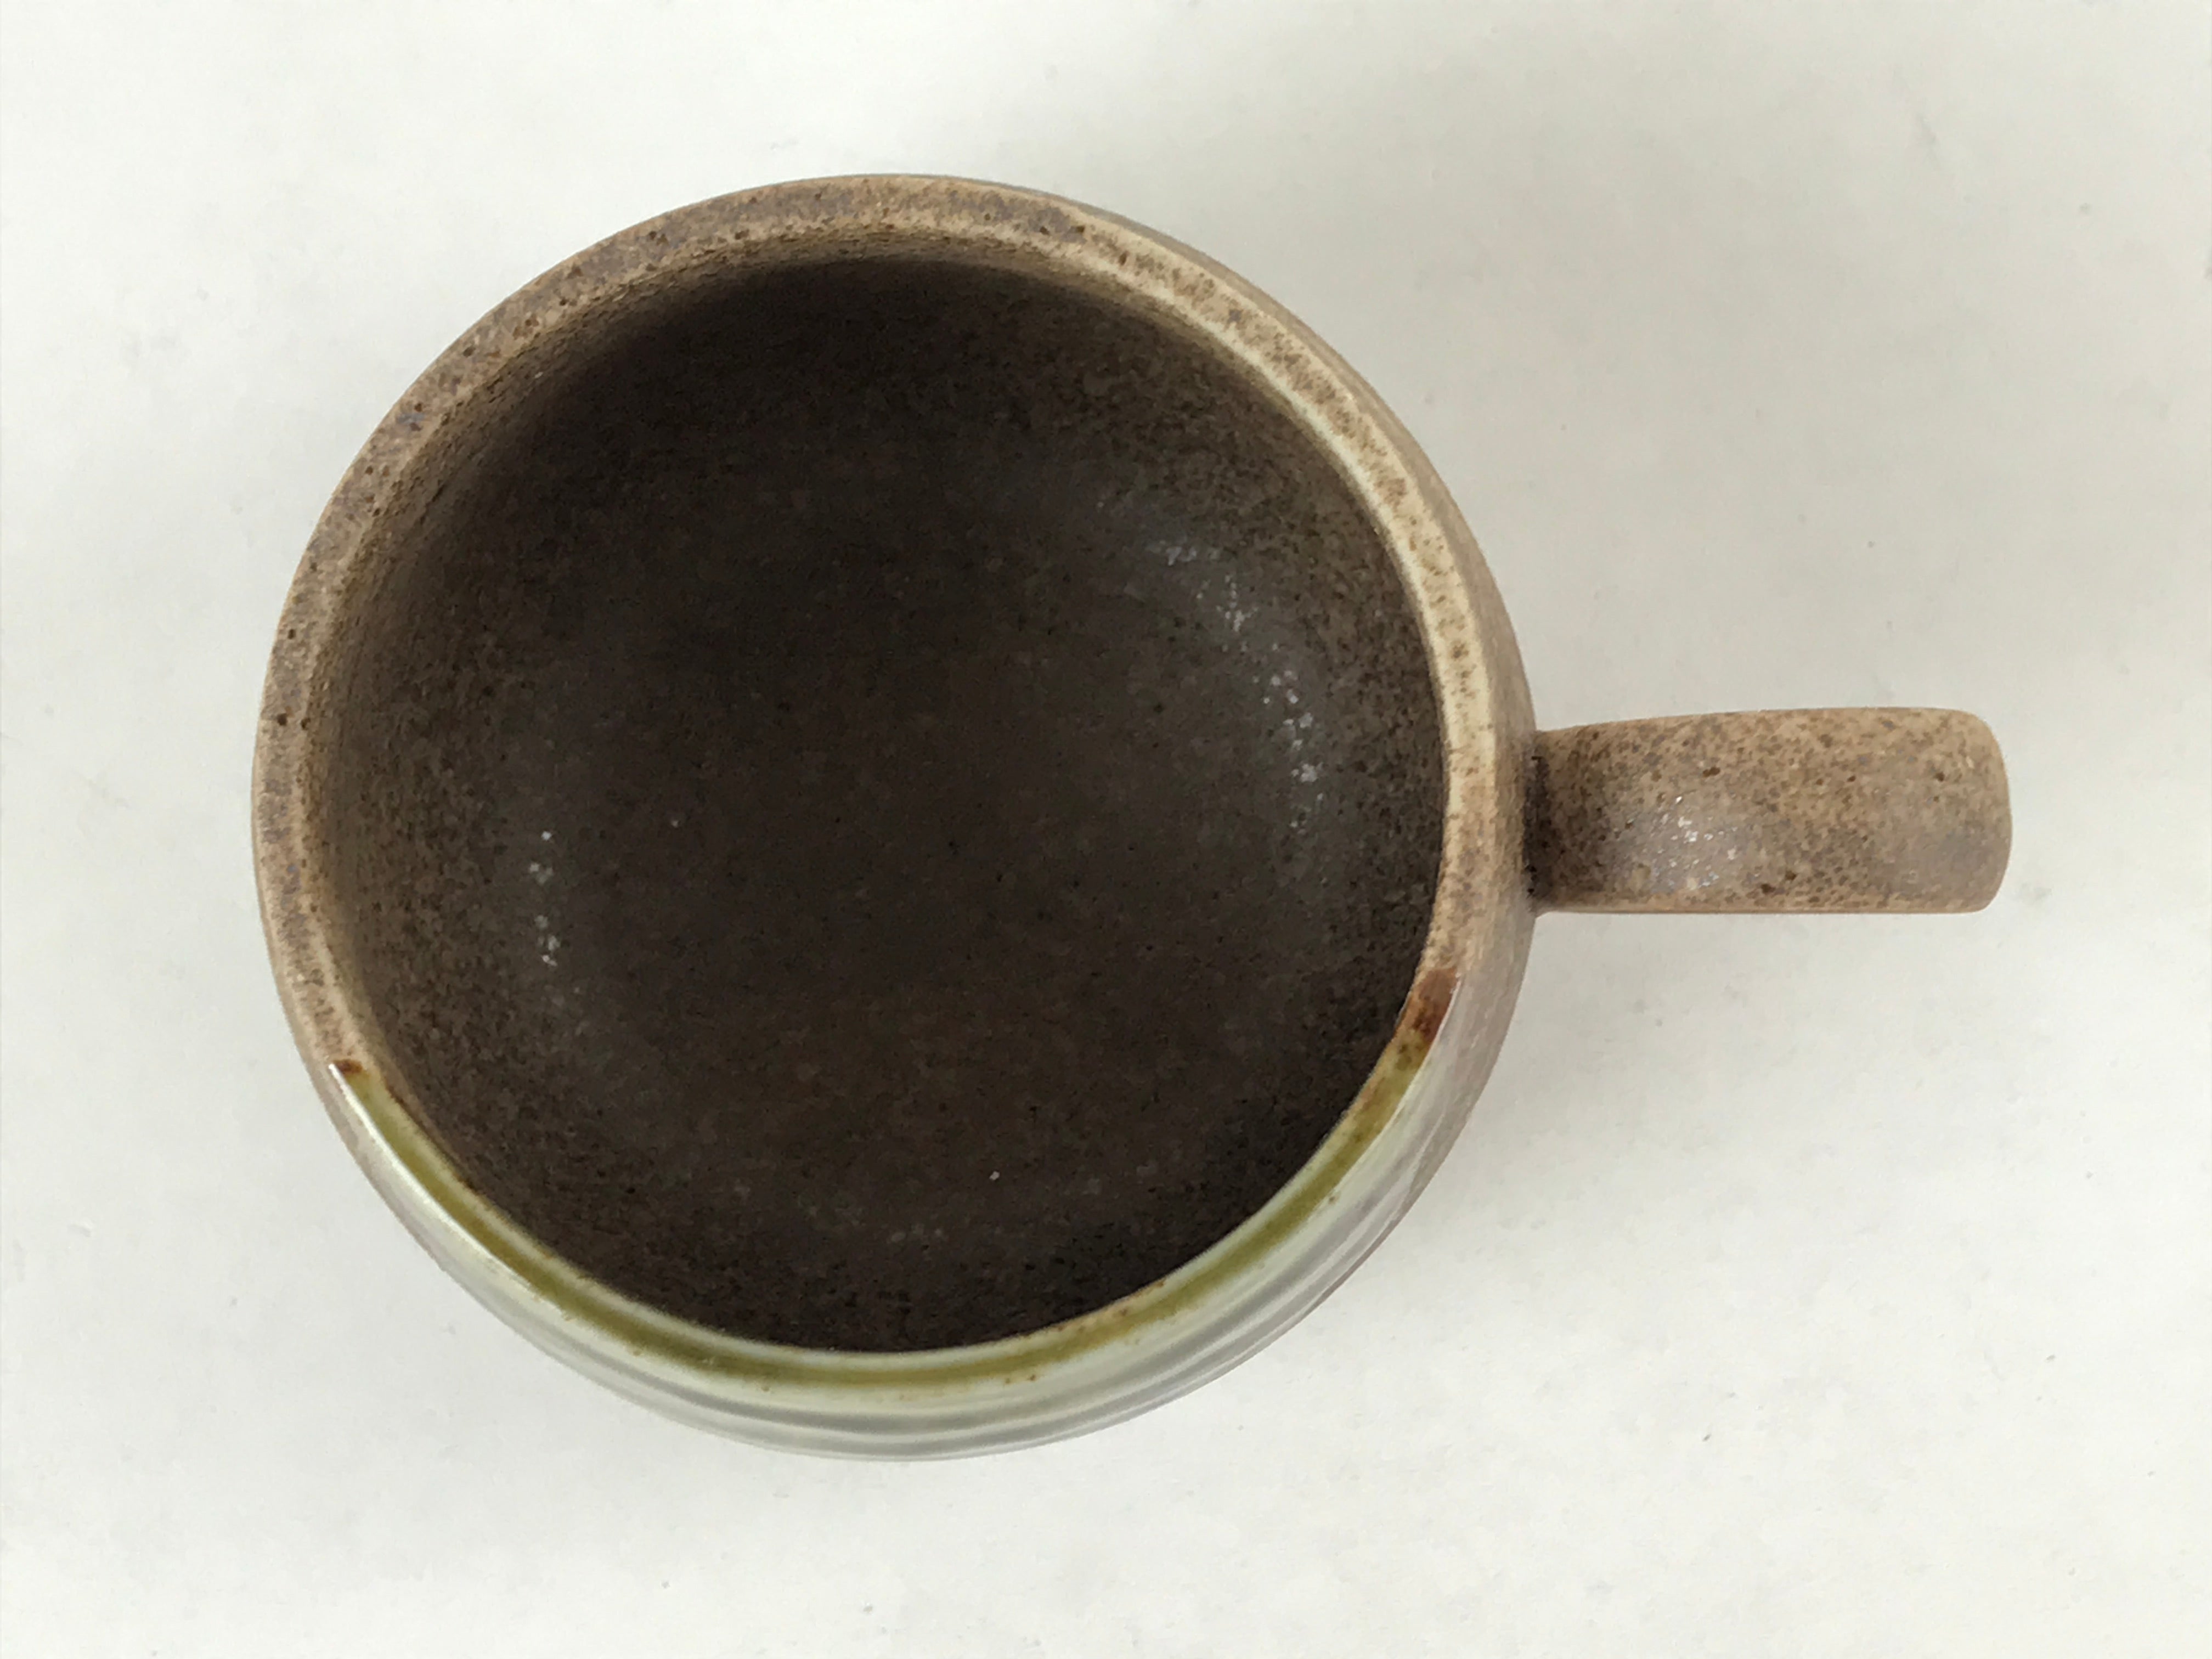 Japanese Ceramic Cup W/ Handle Lid Spoon Vtg Brown Green Condiment Box PY539